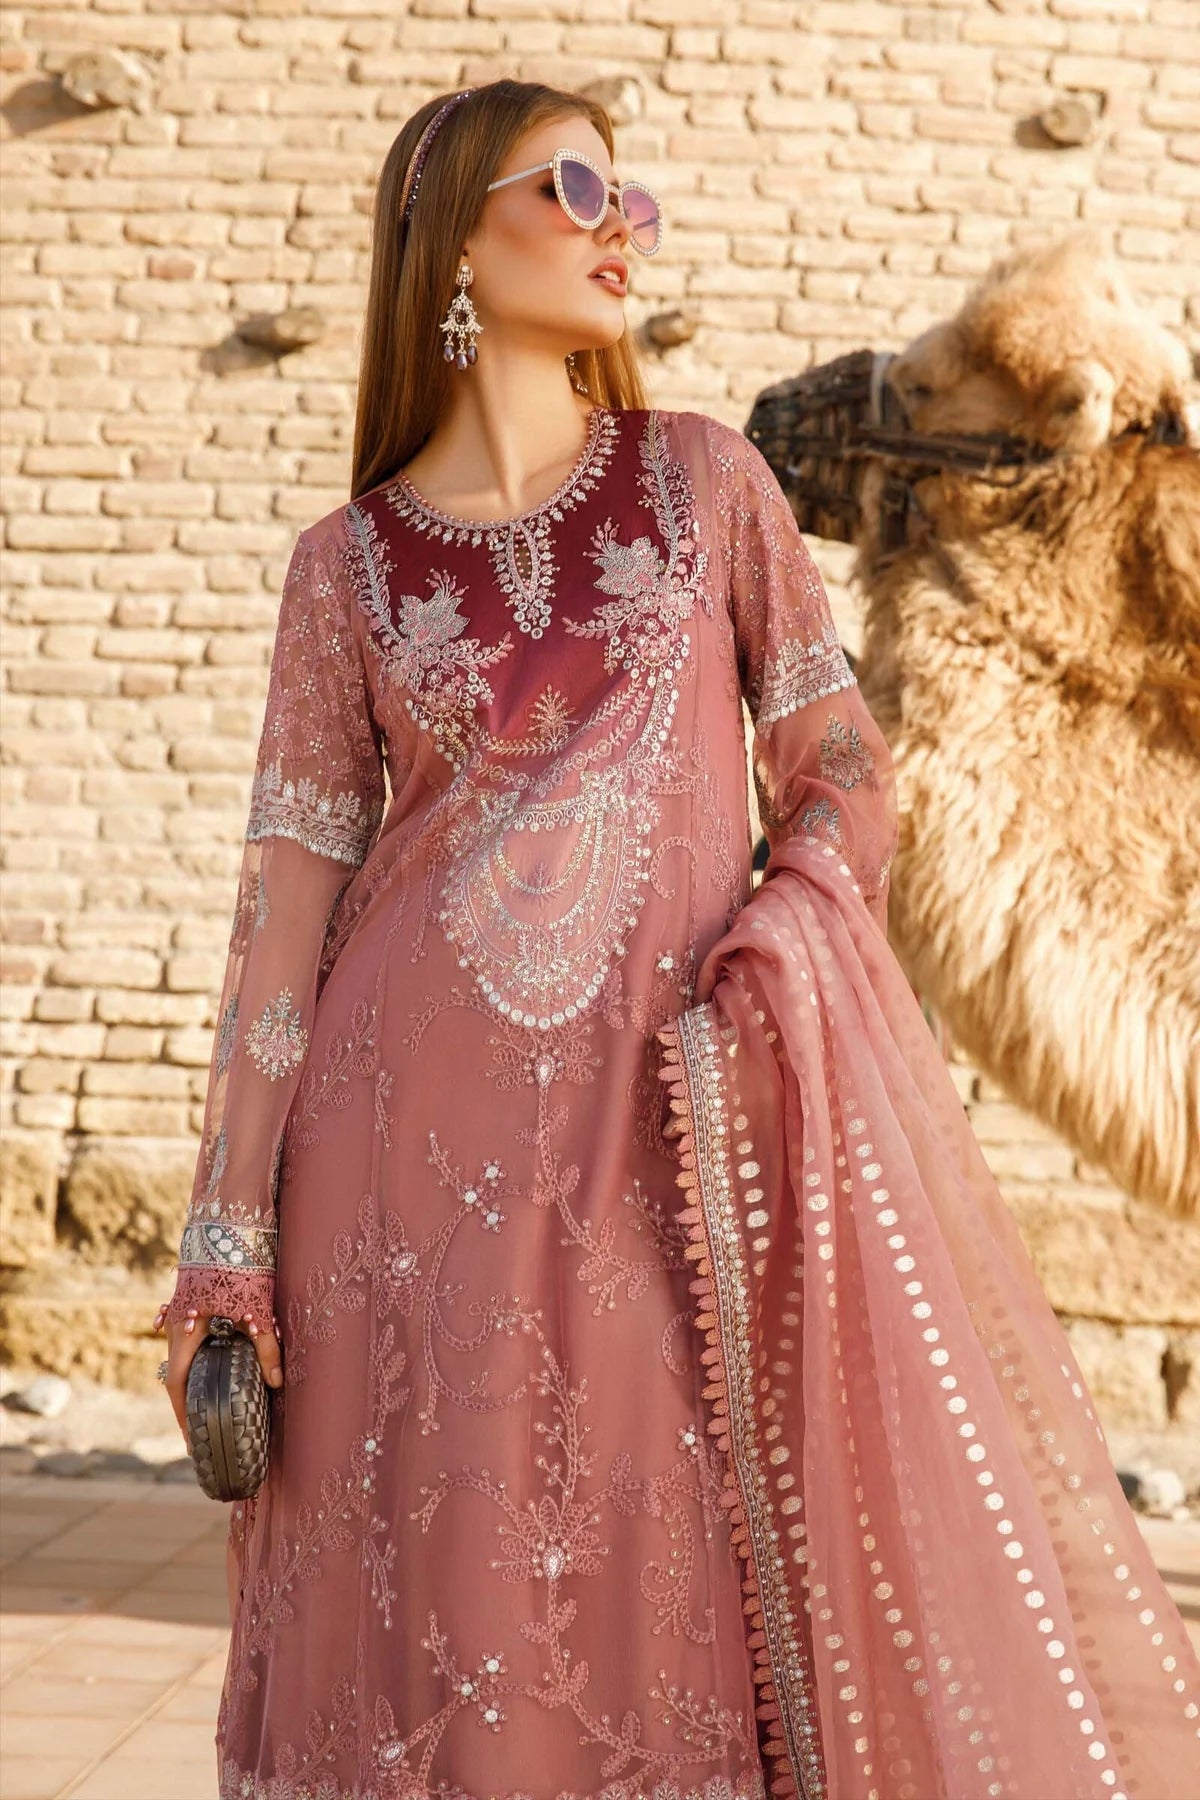 Maria B Inspired Embroidered Dusty Pink 3 Piece Outfit With Net Dupatta - Desi Posh